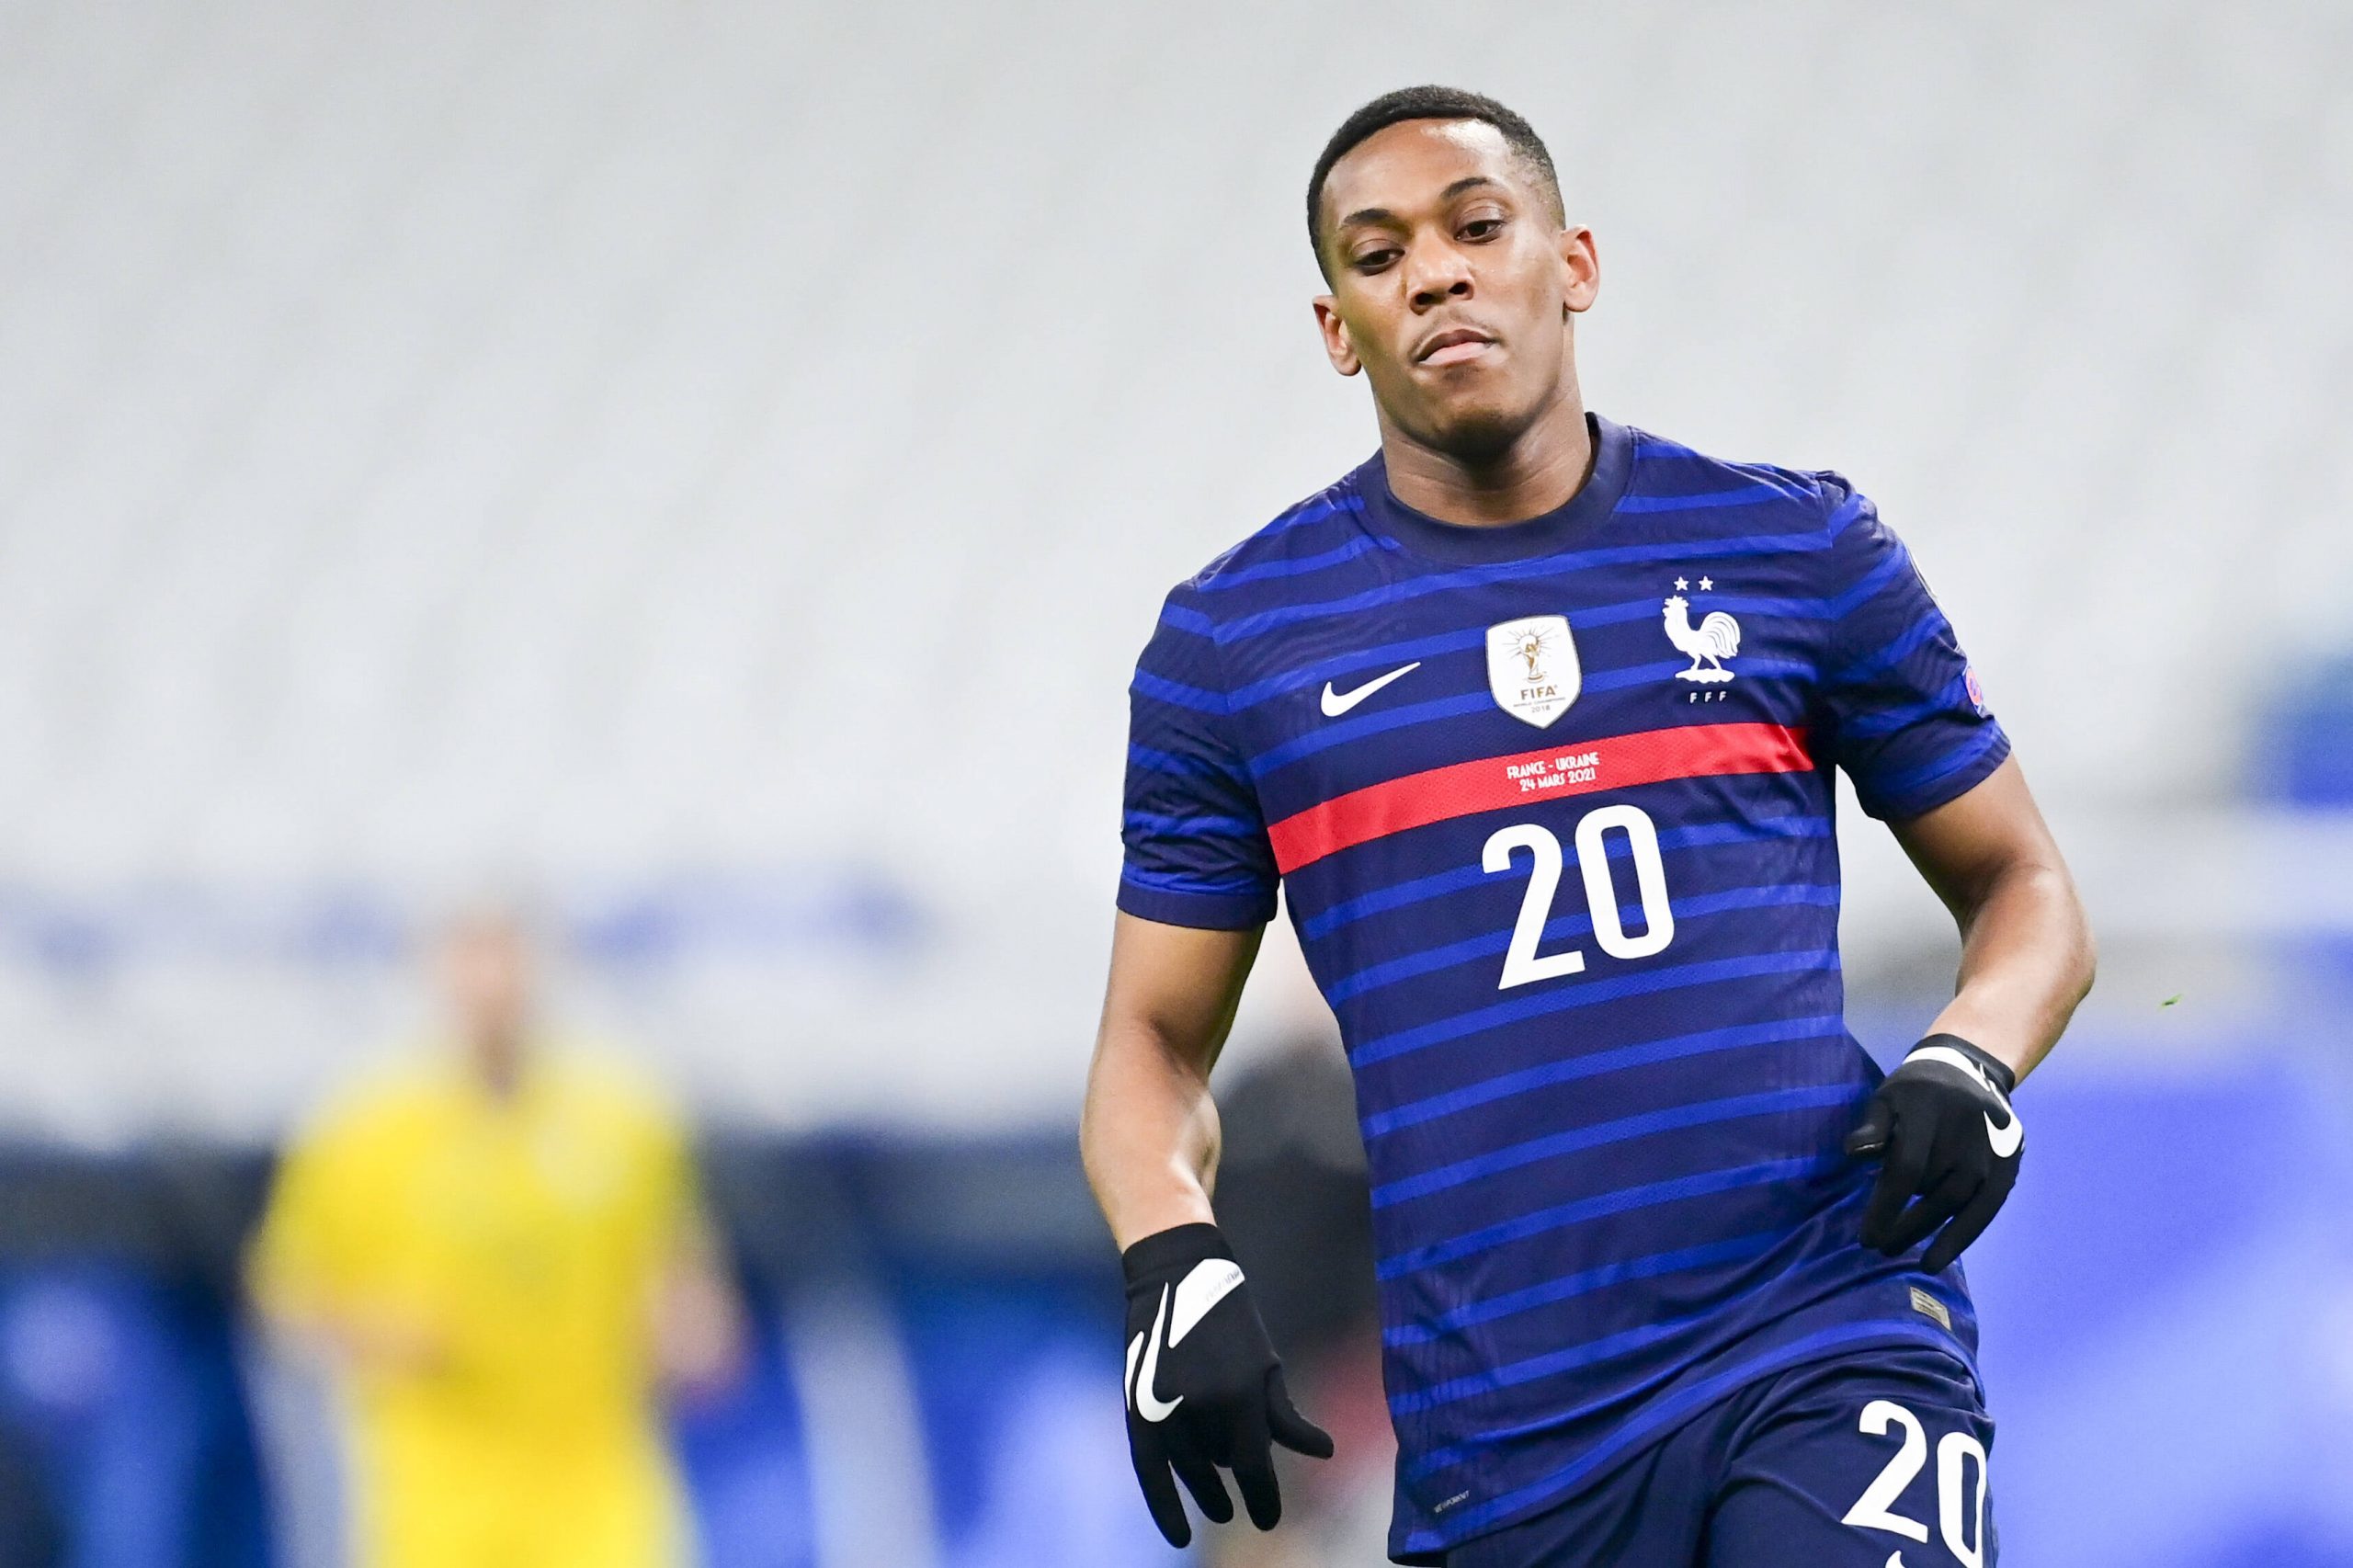 Manchester United star Anthony Martial agrees in principle to join Sevilla.